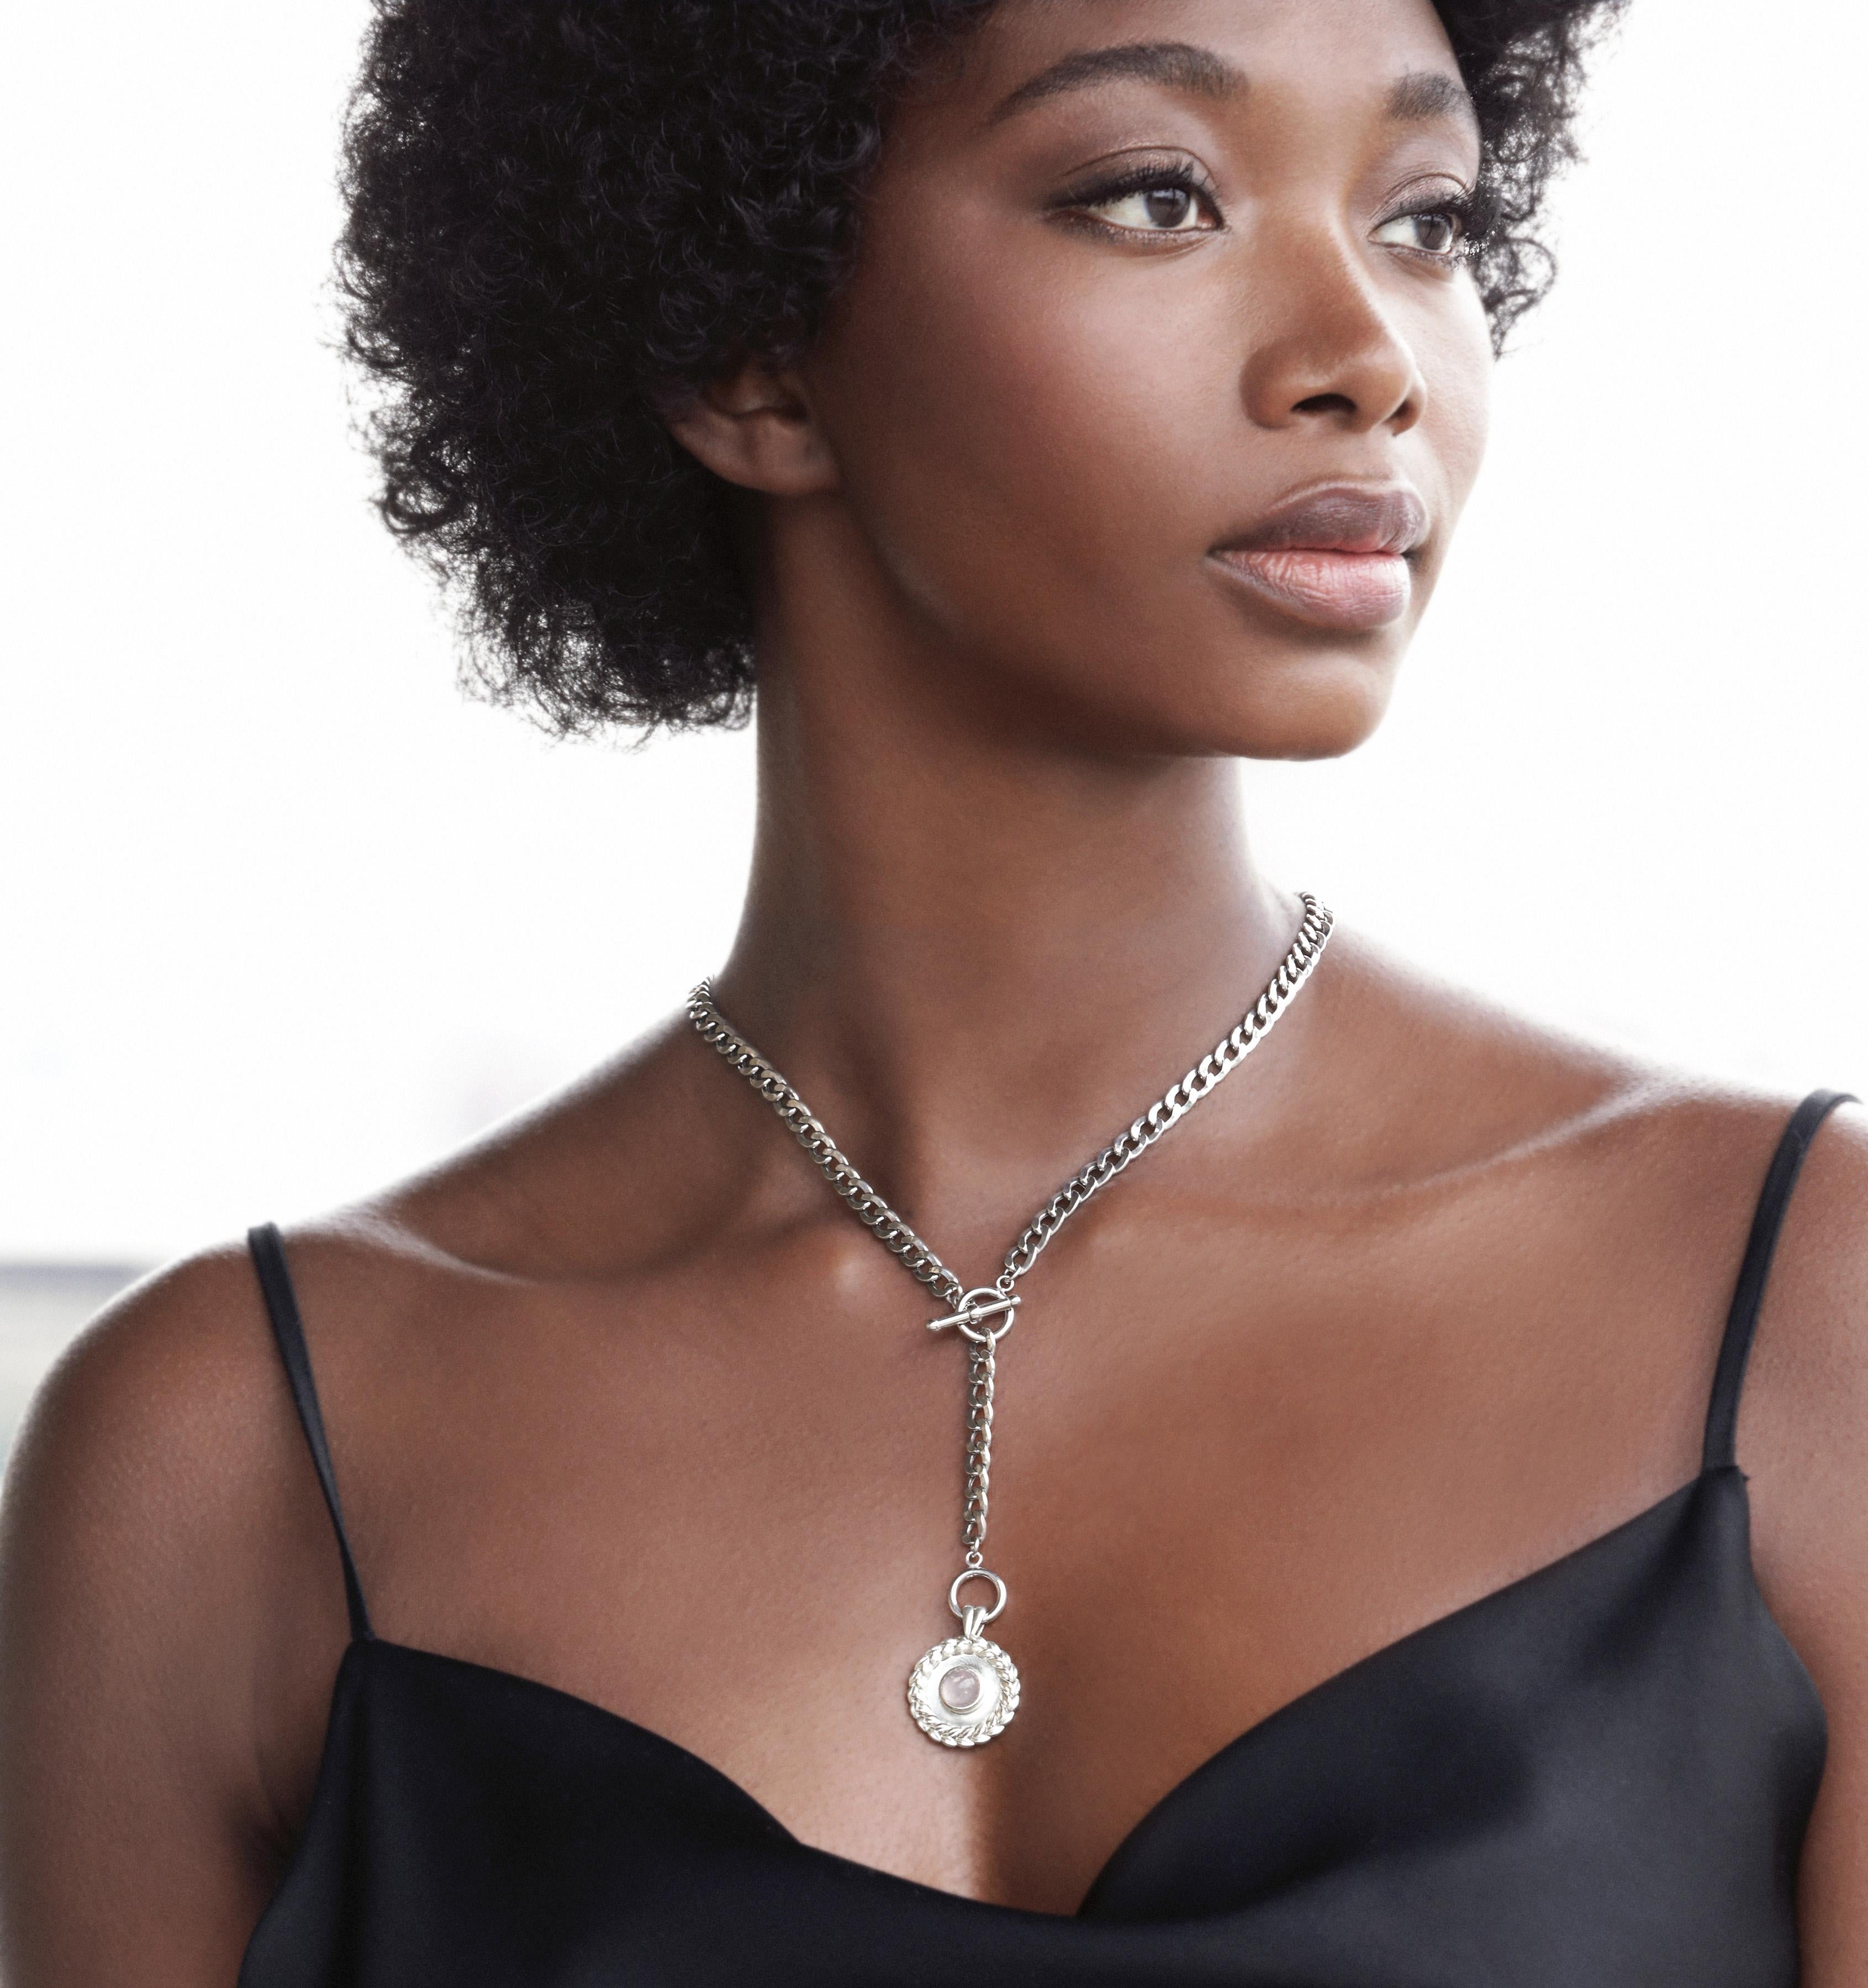 The classic curb chain is terrific alone, but this stunner adds the extra punch with a solid coin pendant and adjustable lariat style.

Available in Sterling Silver or 18Karat Yellow Gold Vermeil Curb Chain
Semiprecious stones in Pink Rose Quartz or